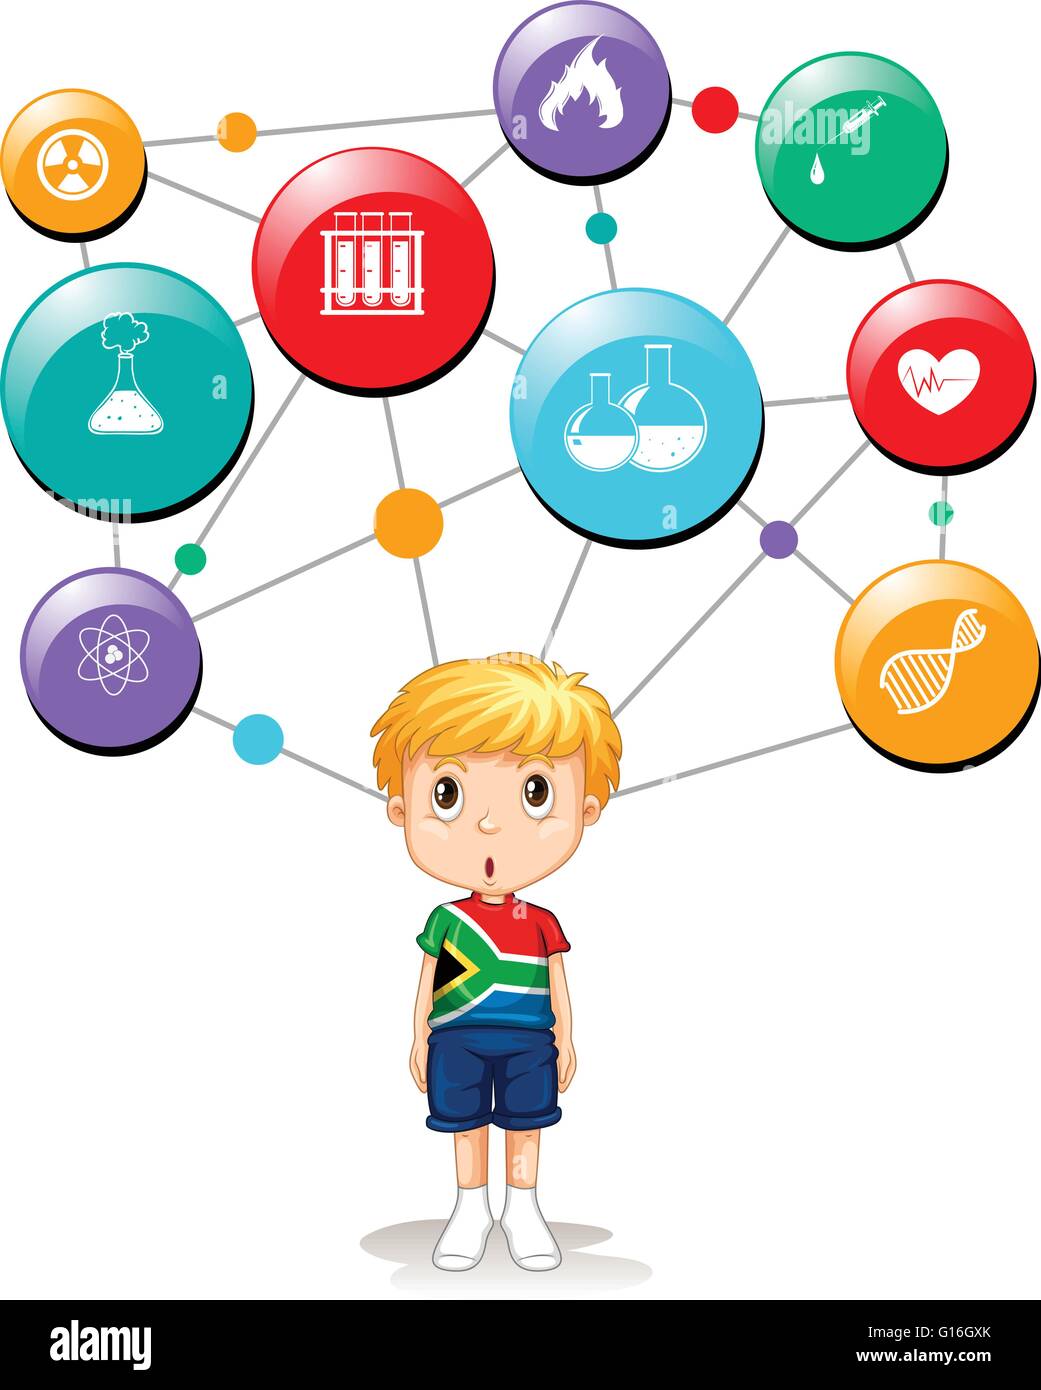 South African boy with science symbols illustration Stock Vector